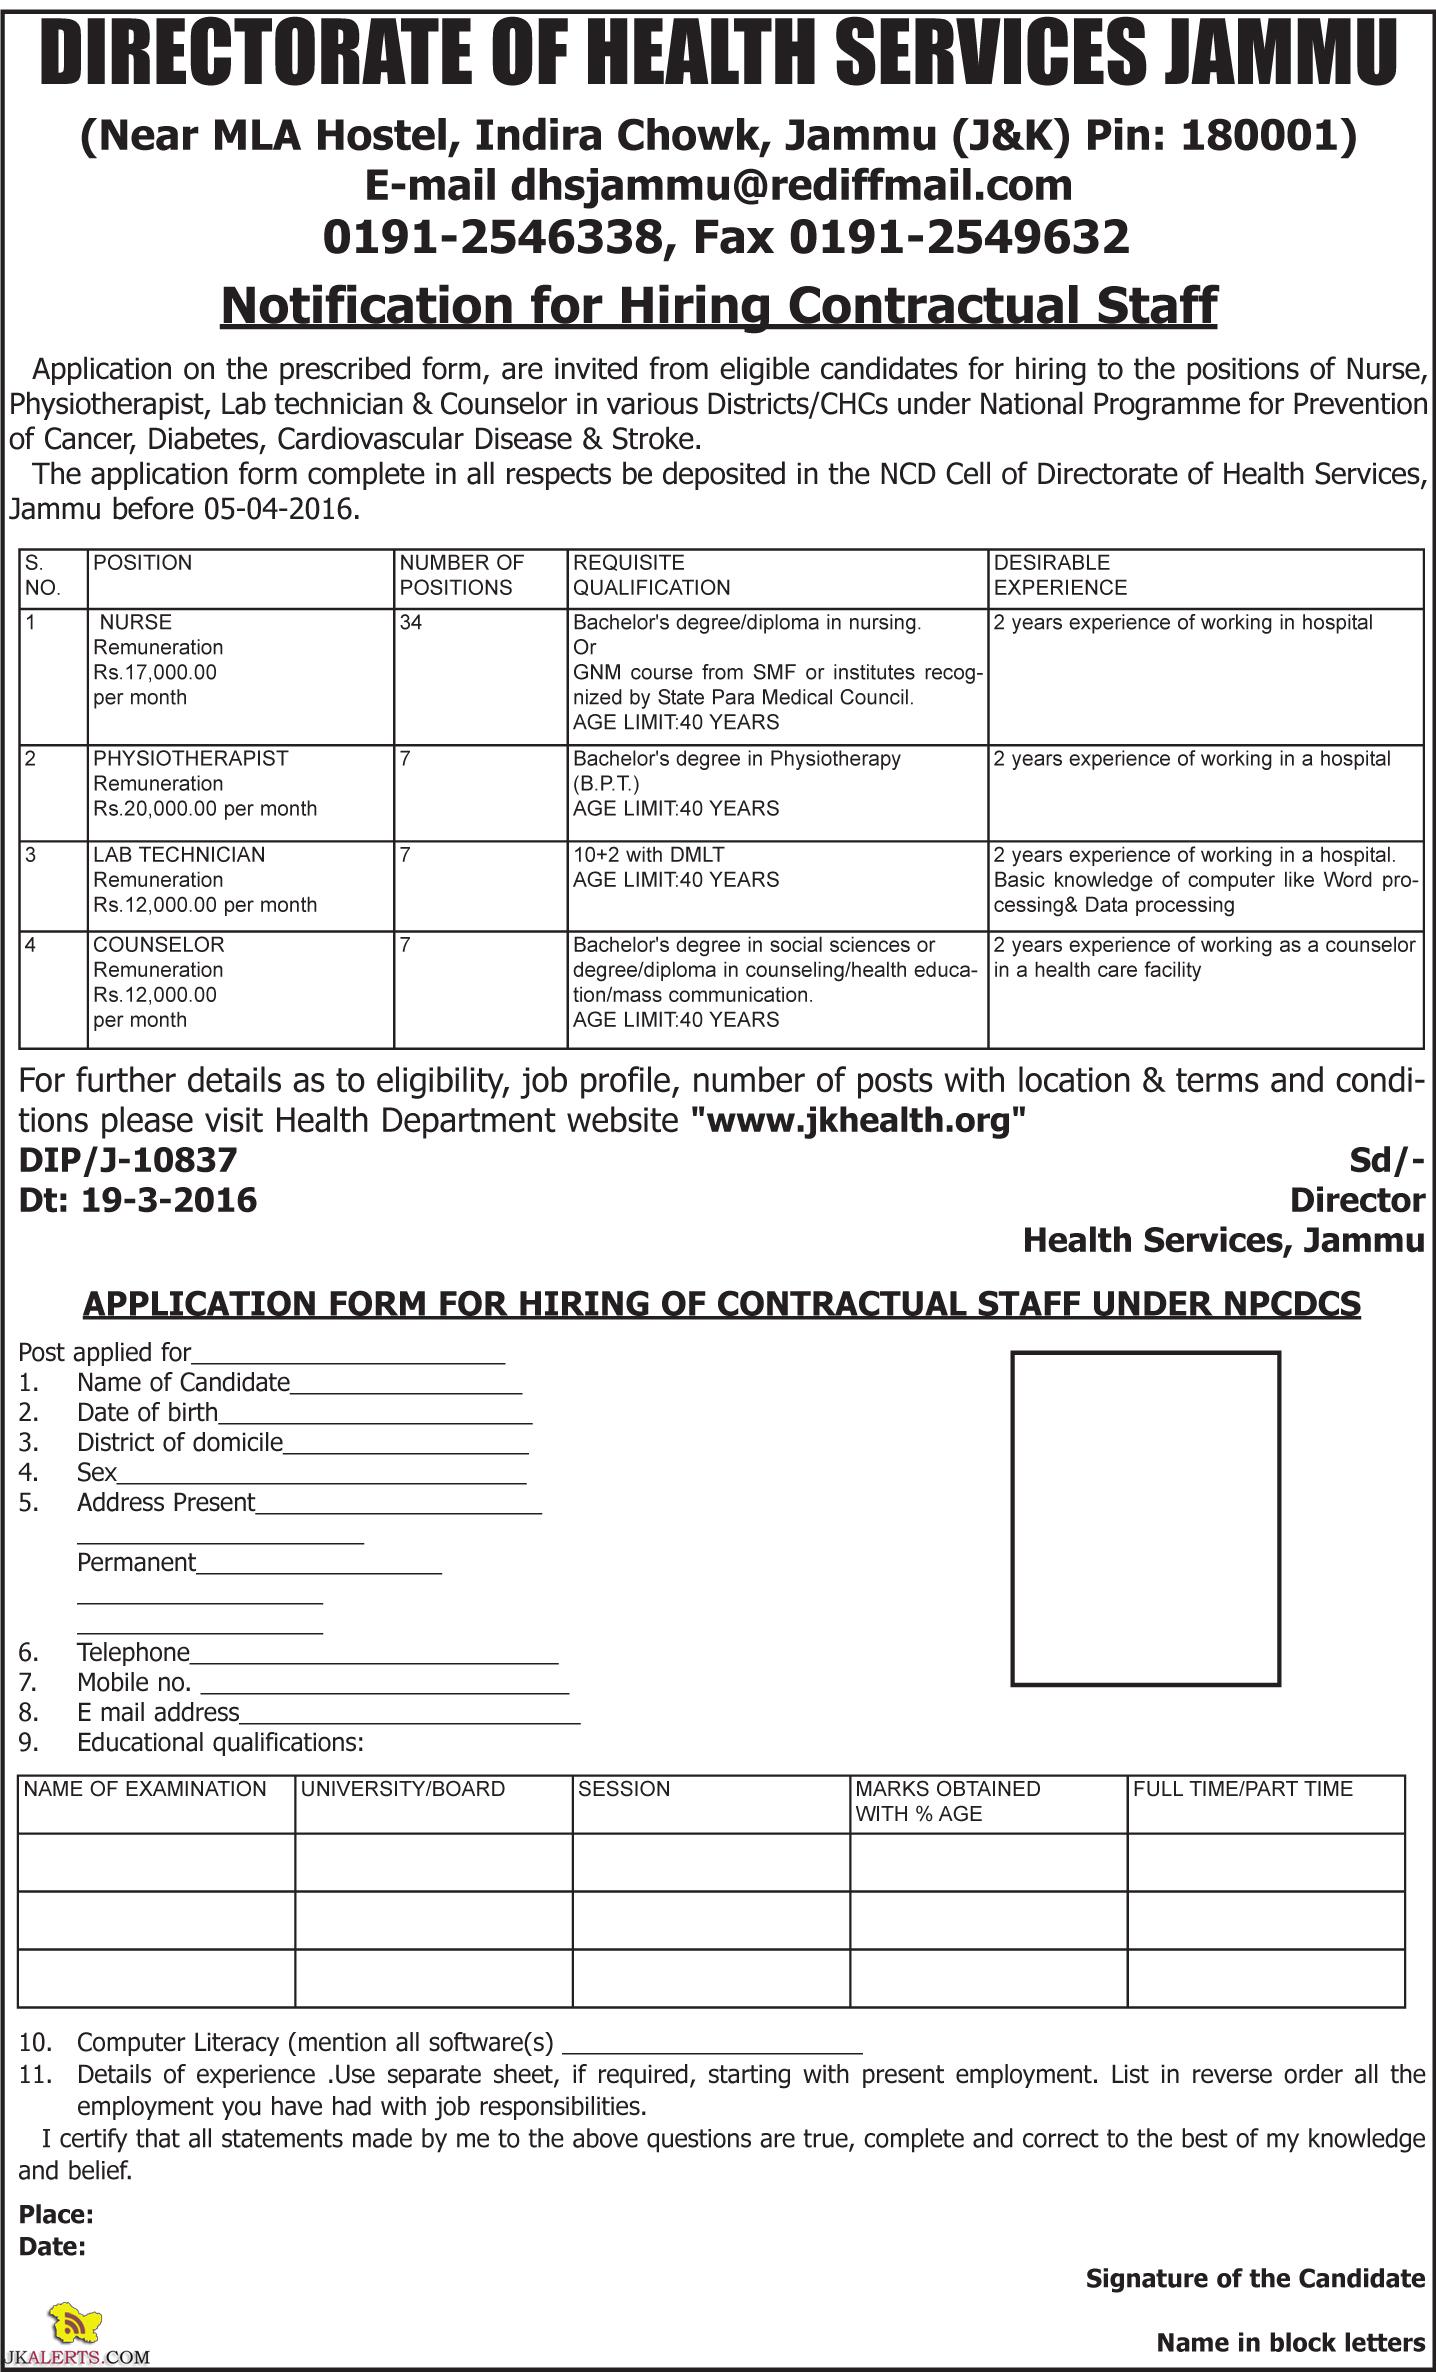 Government Jobs in DIRECTORATE OF HEALTH SERVICES JAMMU